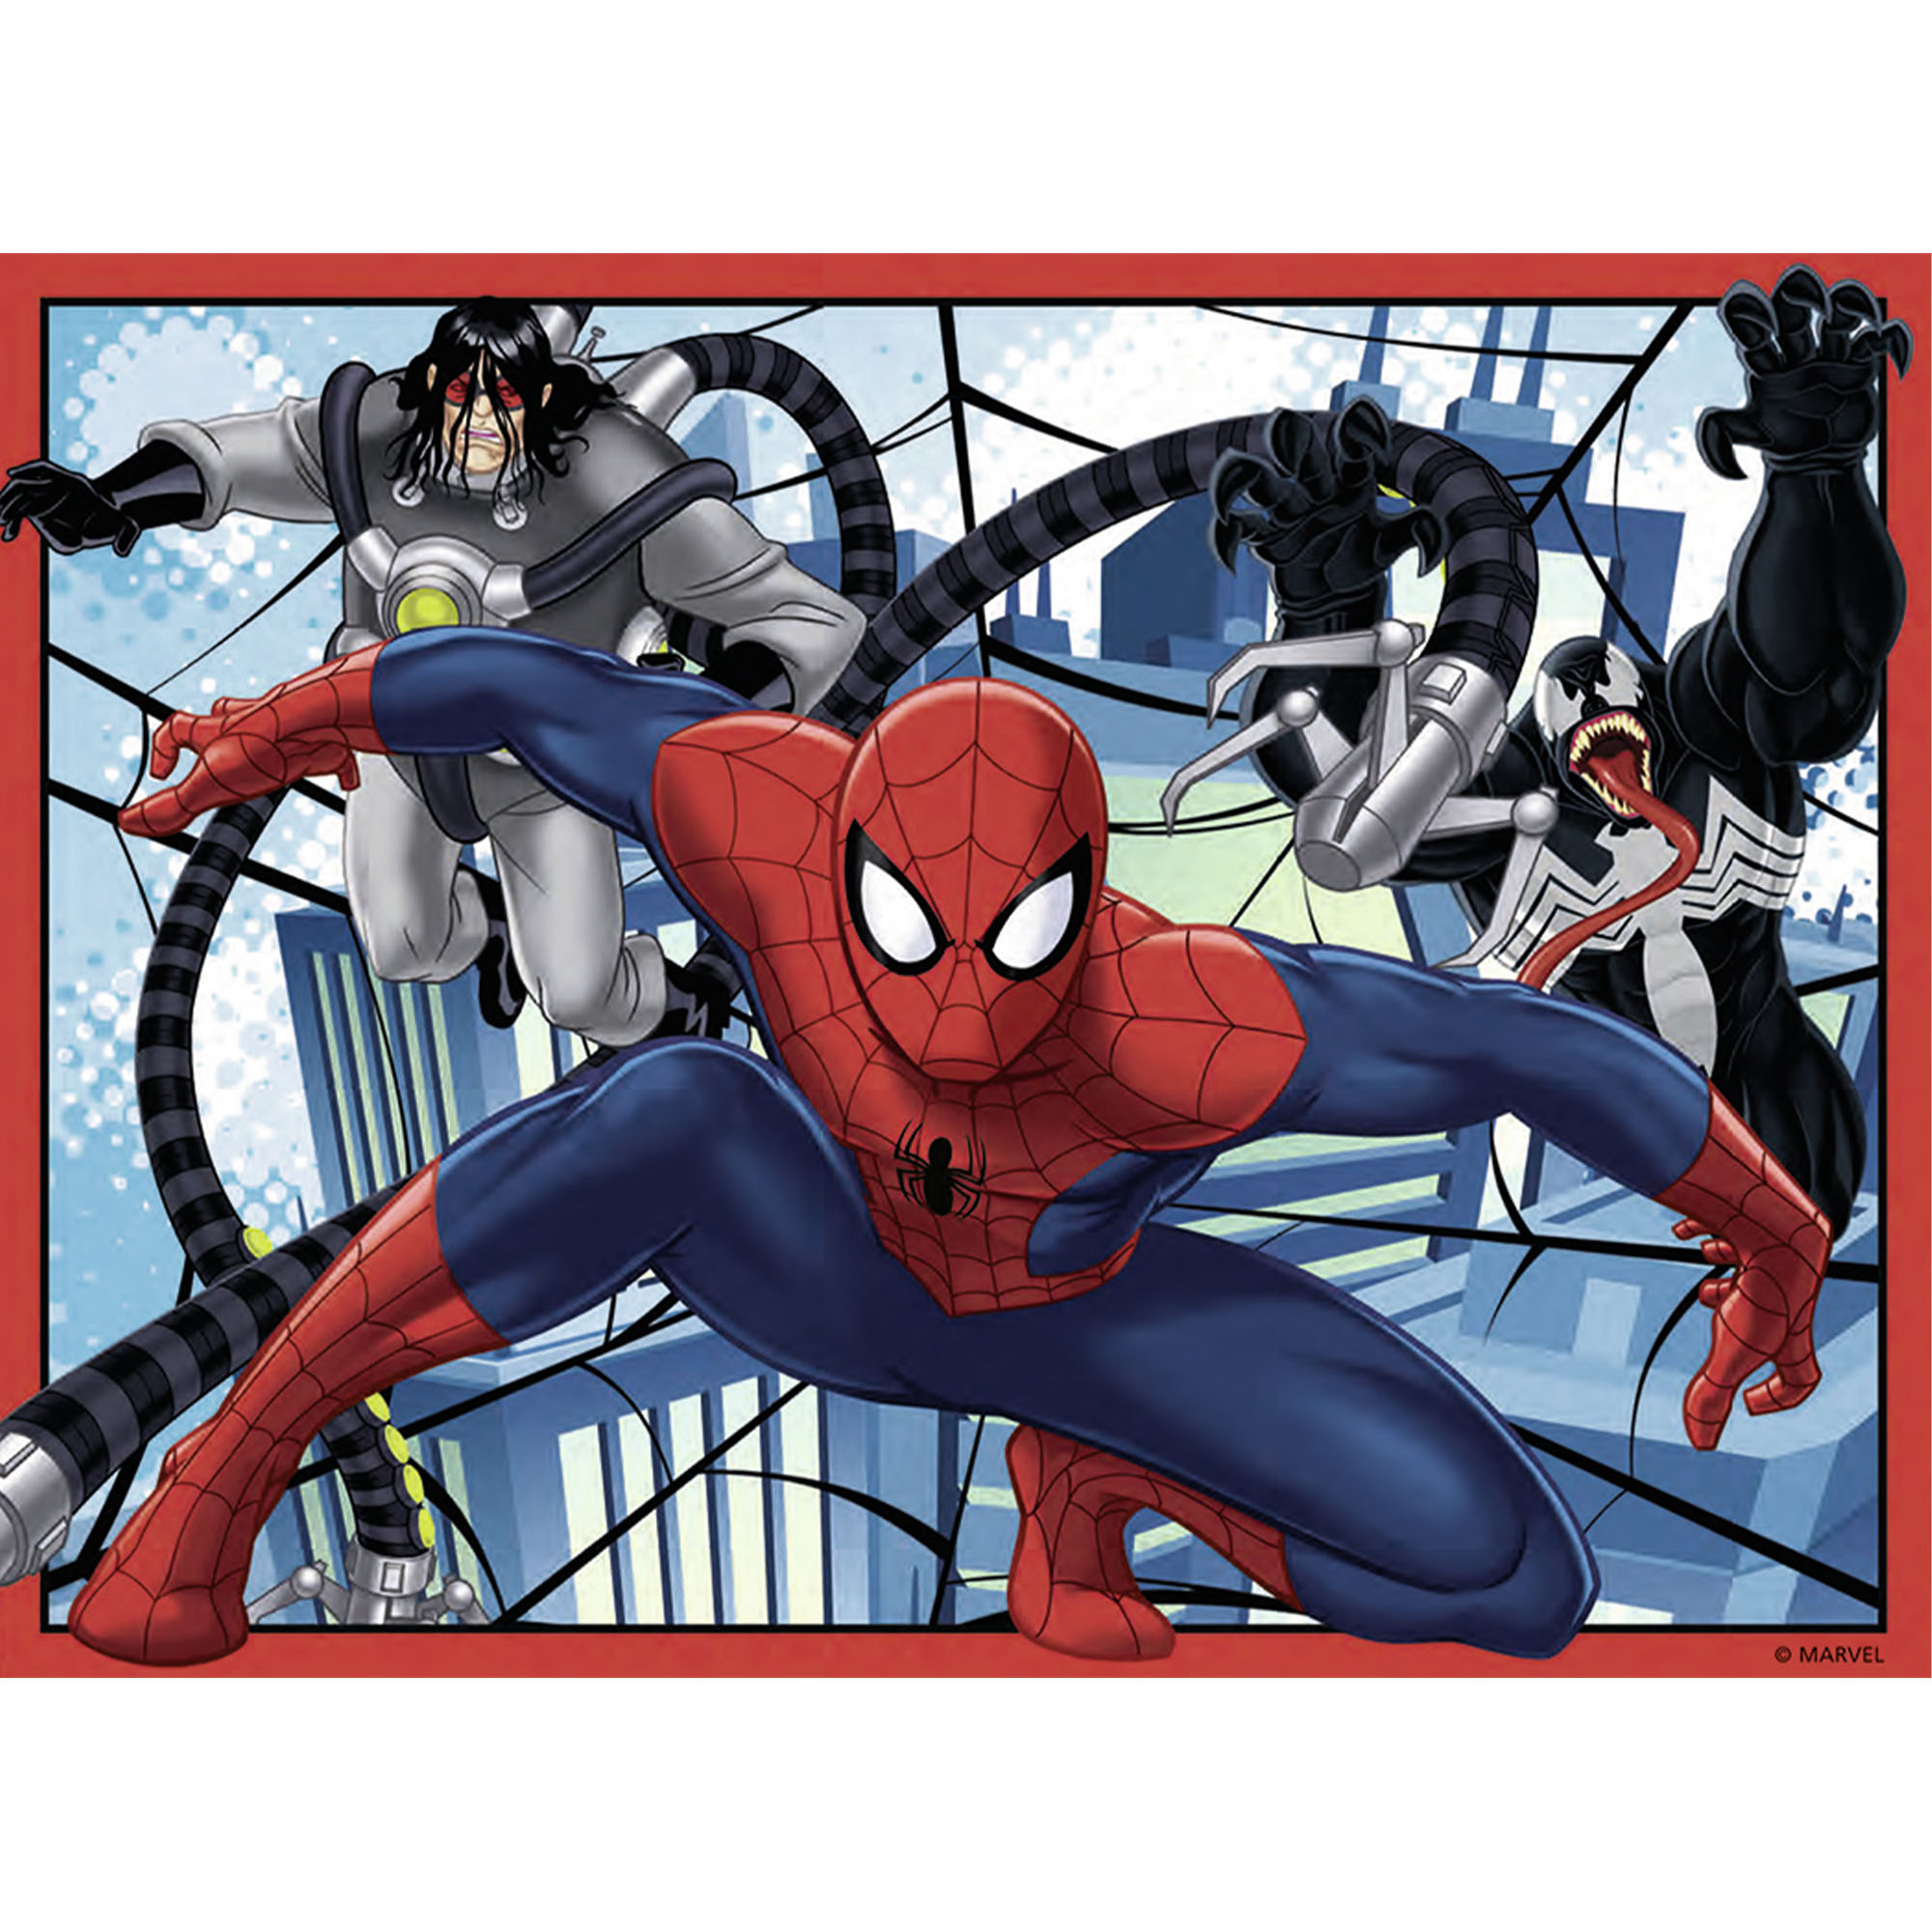 Ravensburger Puzzle 4 in 1 07363 - Ultimate Spiderman, , large